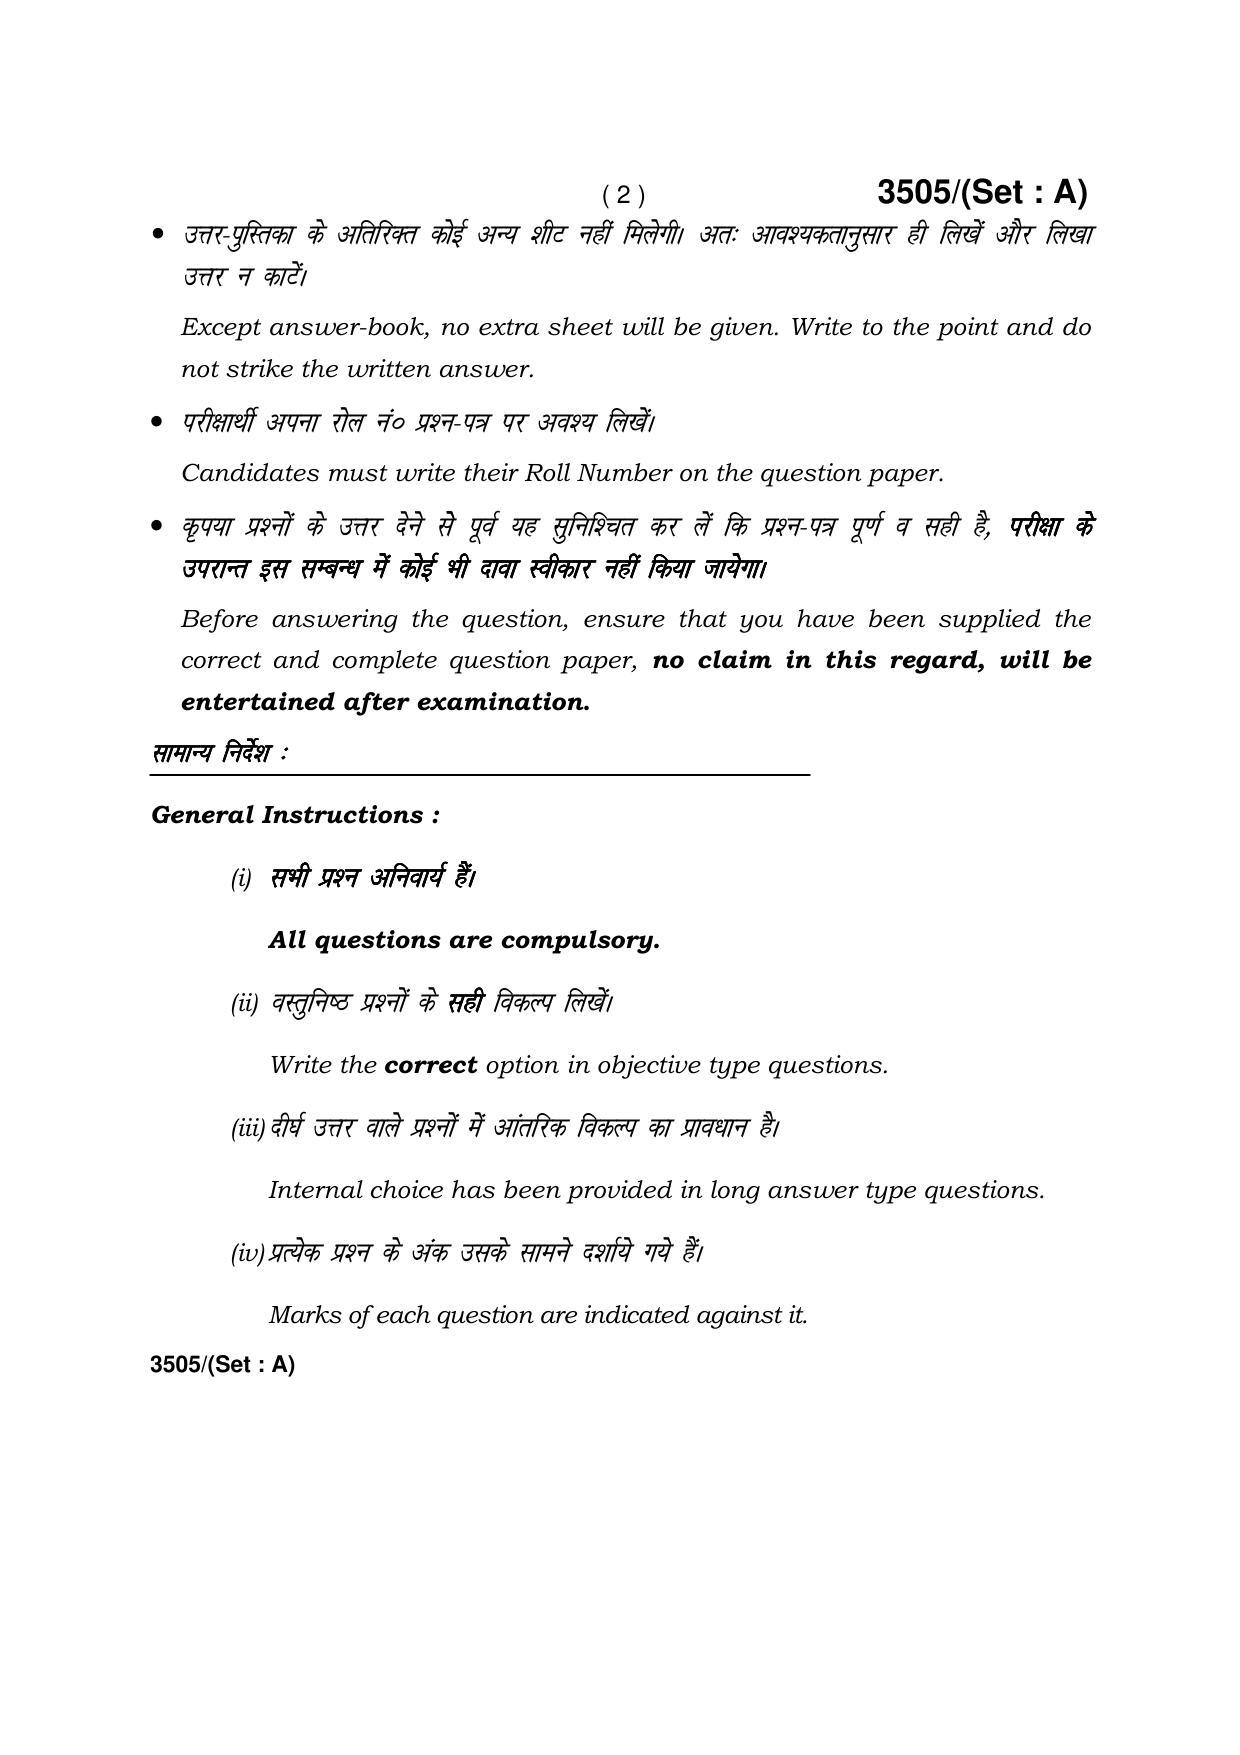 Haryana Board HBSE Class 10 Science -A 2018 Question Paper - Page 2